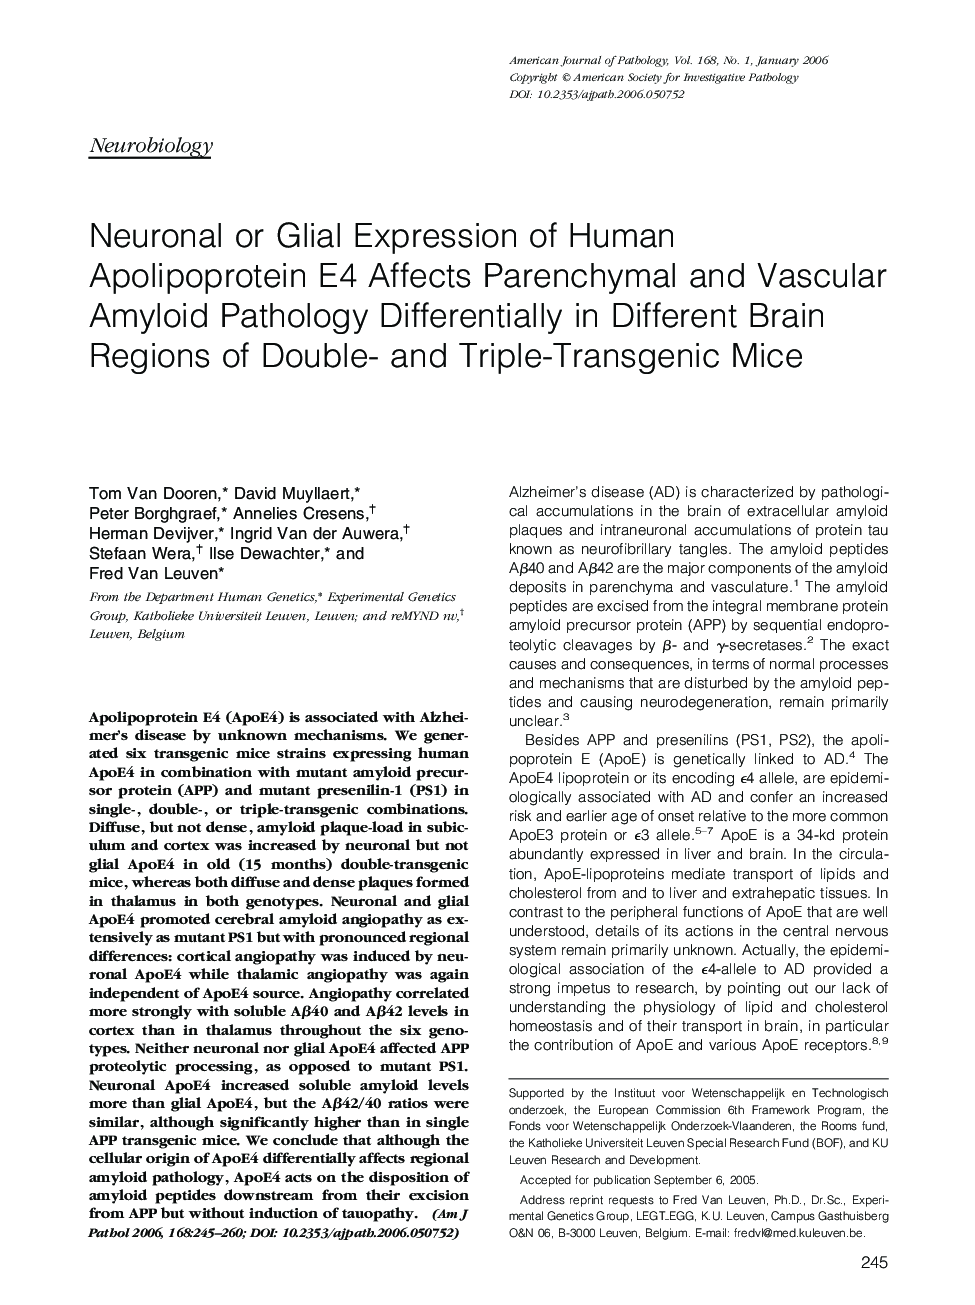 Neuronal or Glial Expression of Human Apolipoprotein E4 Affects Parenchymal and Vascular Amyloid Pathology Differentially in Different Brain Regions of Double- and Triple-Transgenic Mice